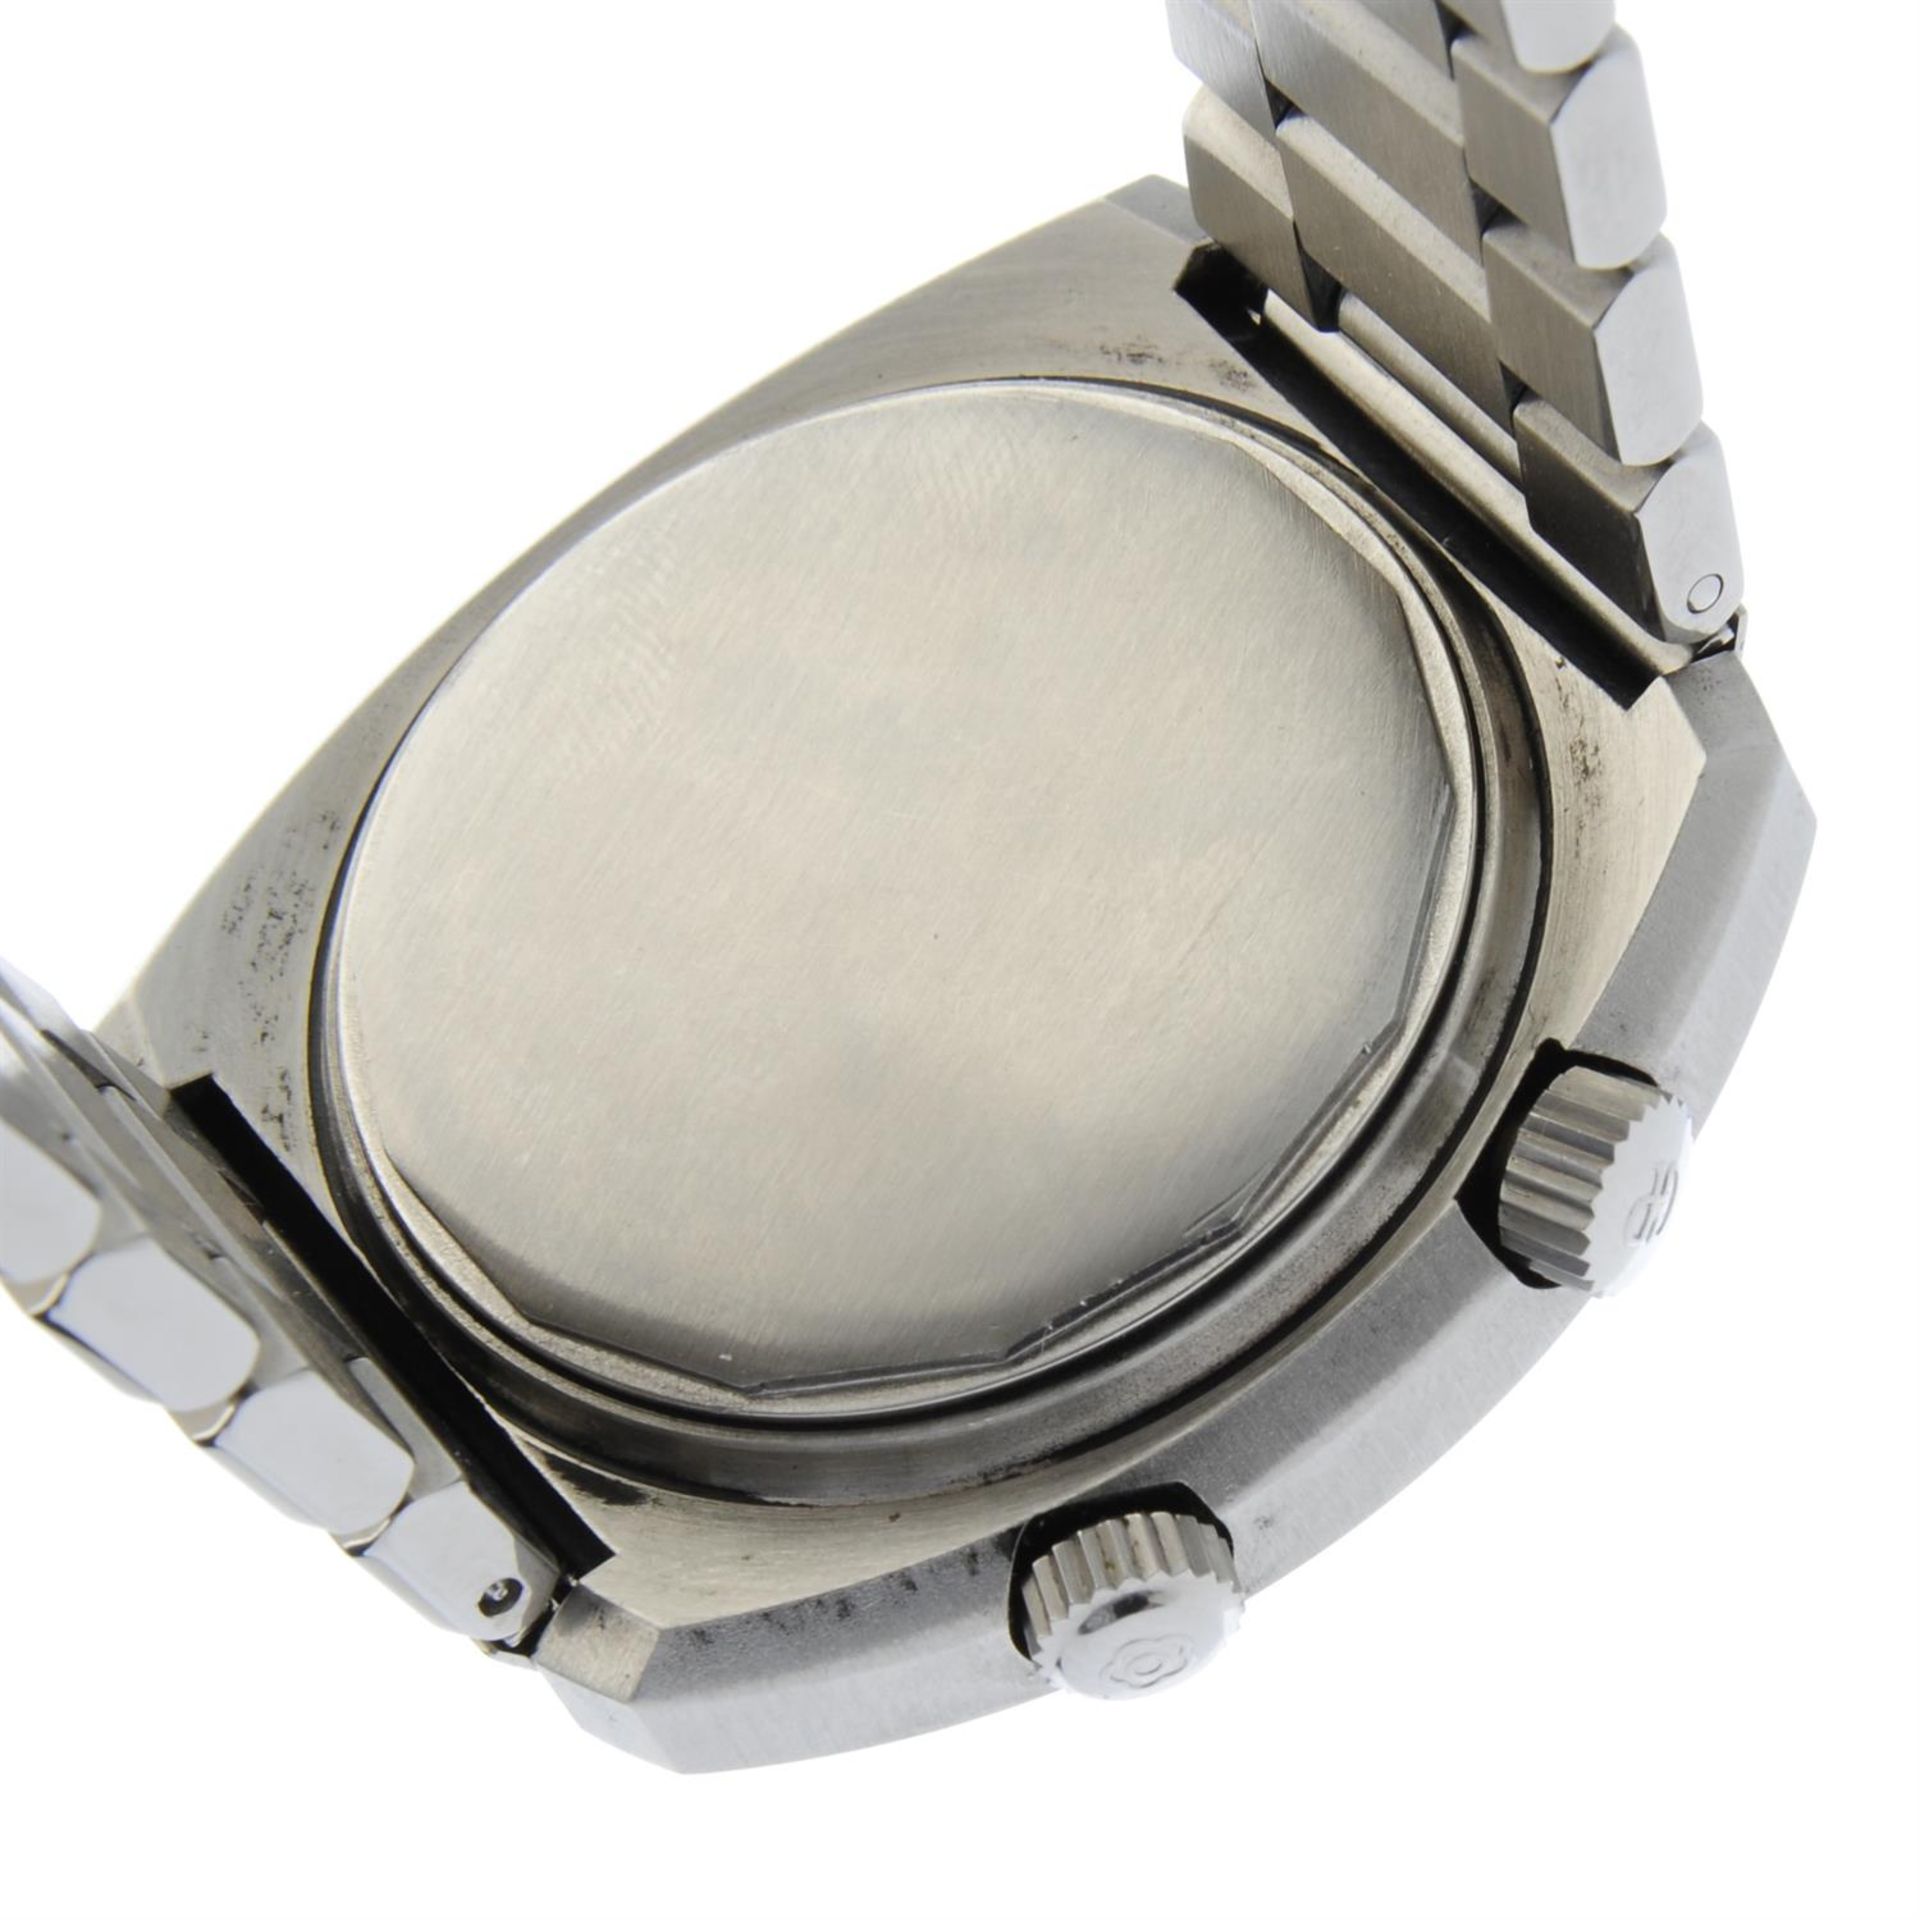 GIRARD PERREGAUX - a stainless steel Gyromatic High Frequency bracelet watch, 43mm. - Image 4 of 5